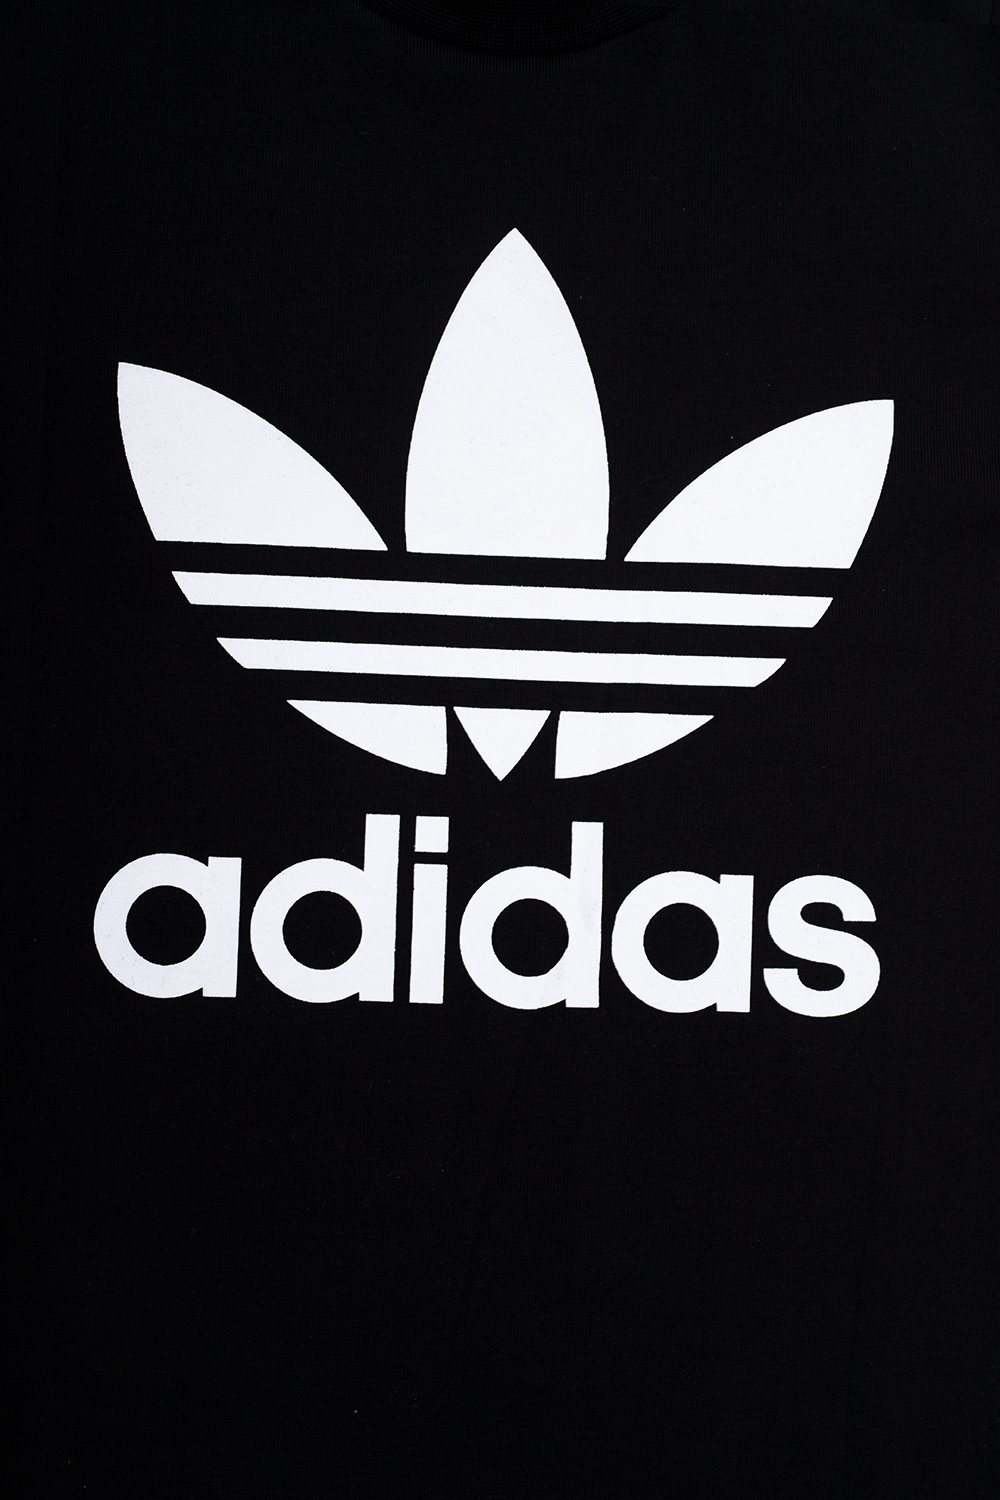 adidas homme Kids adidas homme returns and refunds on time zone